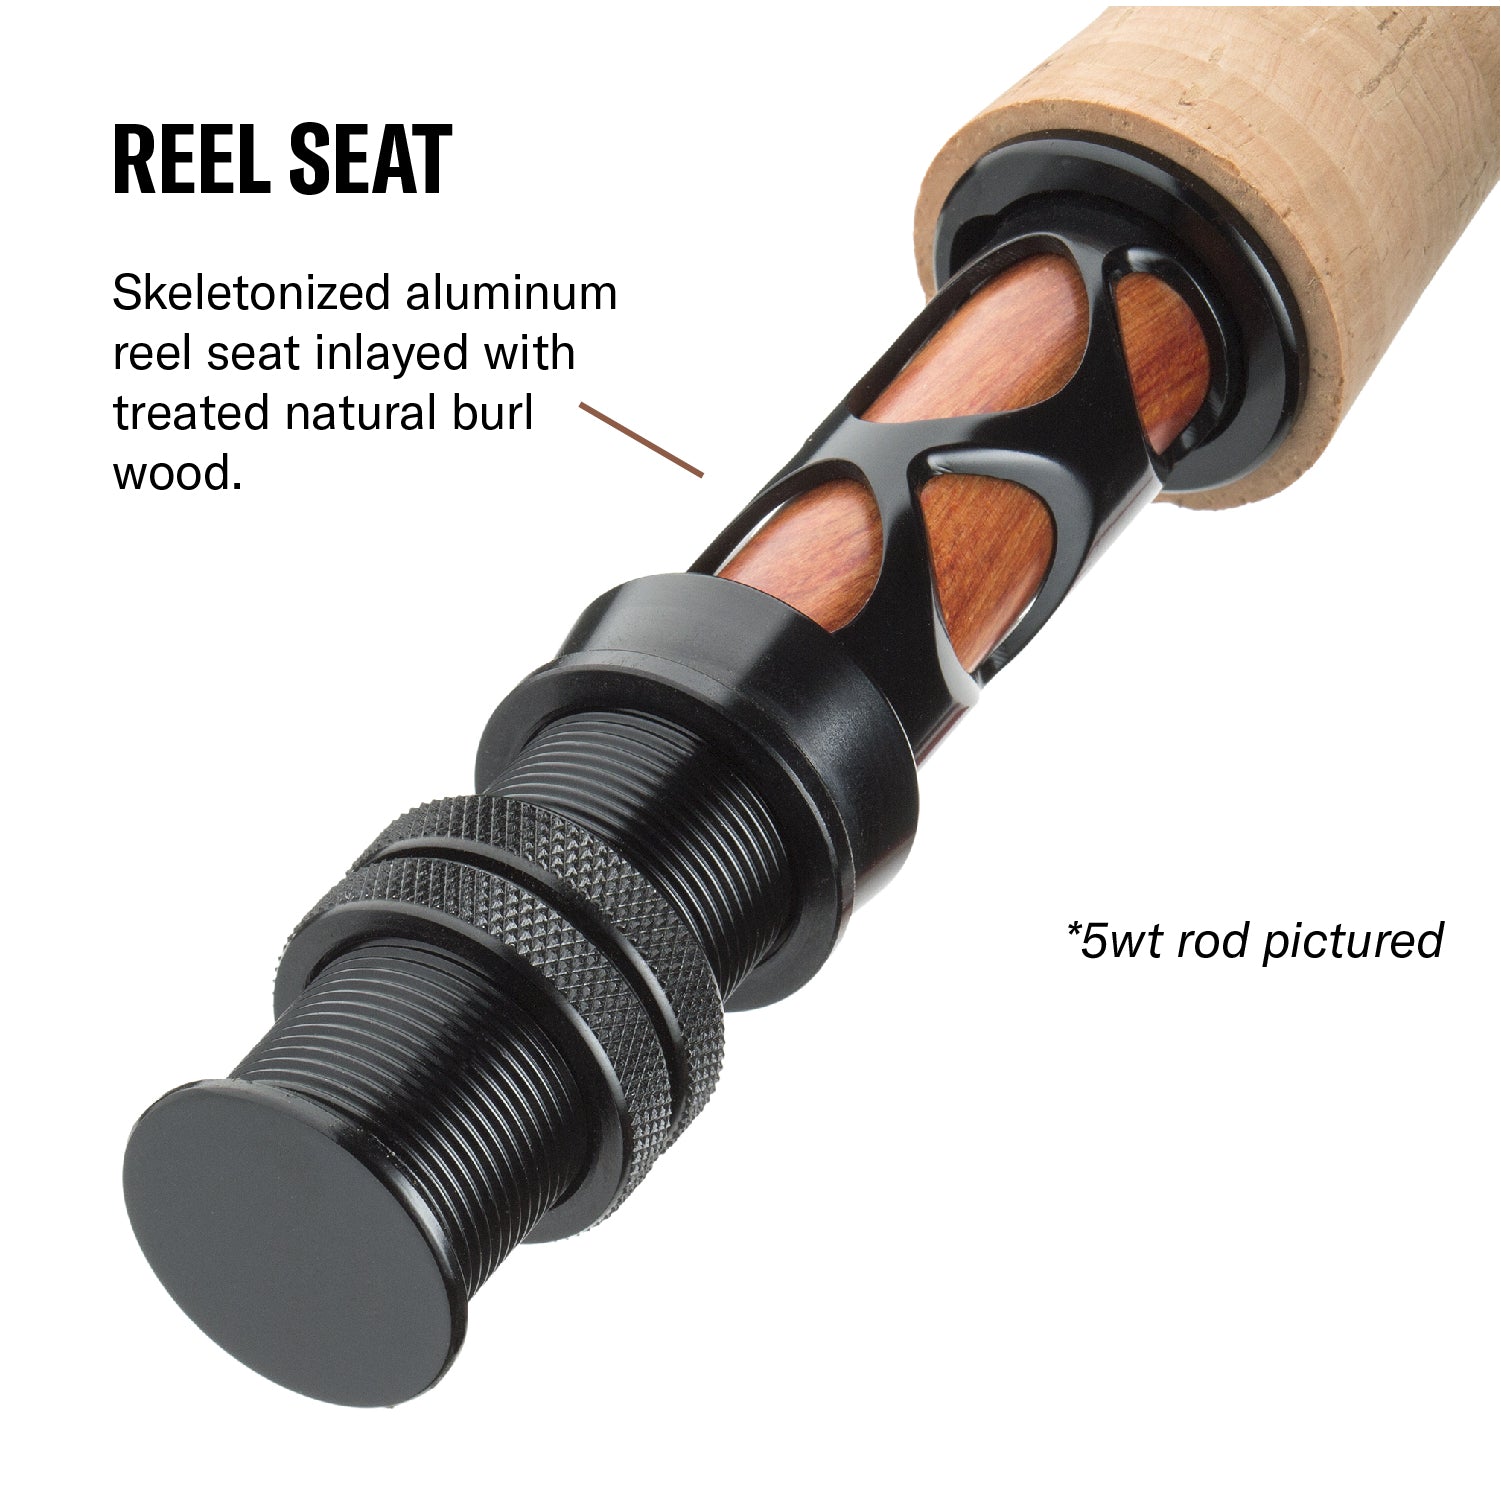 Split Reel Seats for Rod Building - Free Shipping